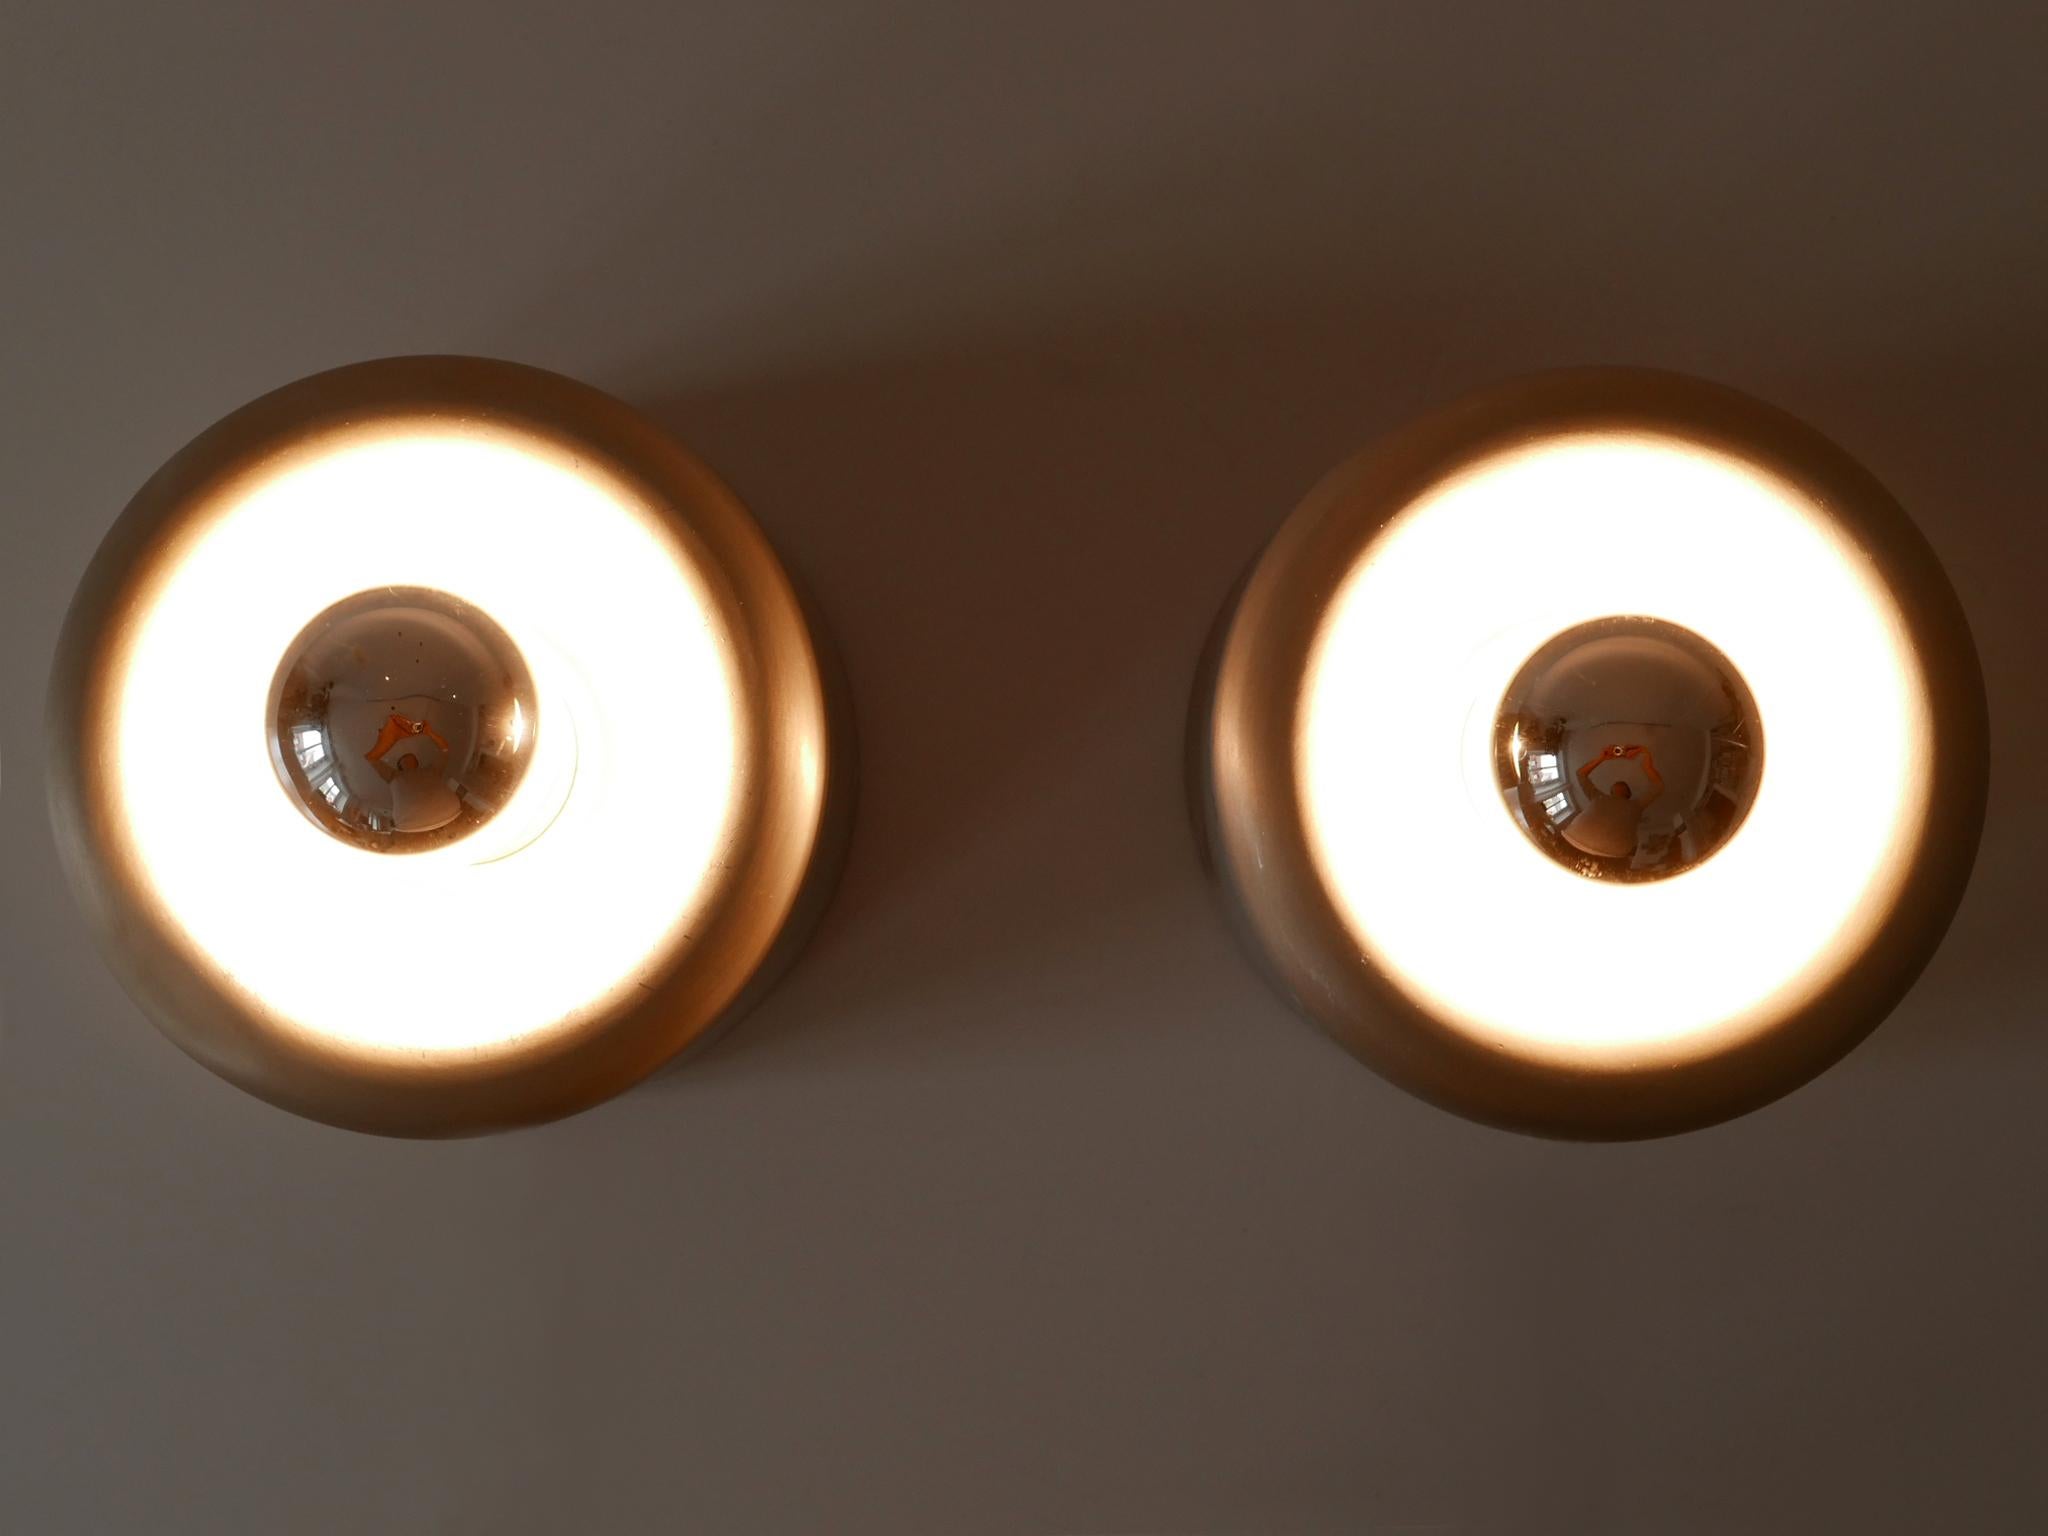 Set of two elegant mid century modern donut flush mounts / sconces. Designed & manufactured by Staff Leuchten, Germany, 1970s. Manufacturers label on the bulb holder.

Executed in aluminium and metal, the fixture is executed with 1 x E27 / E26